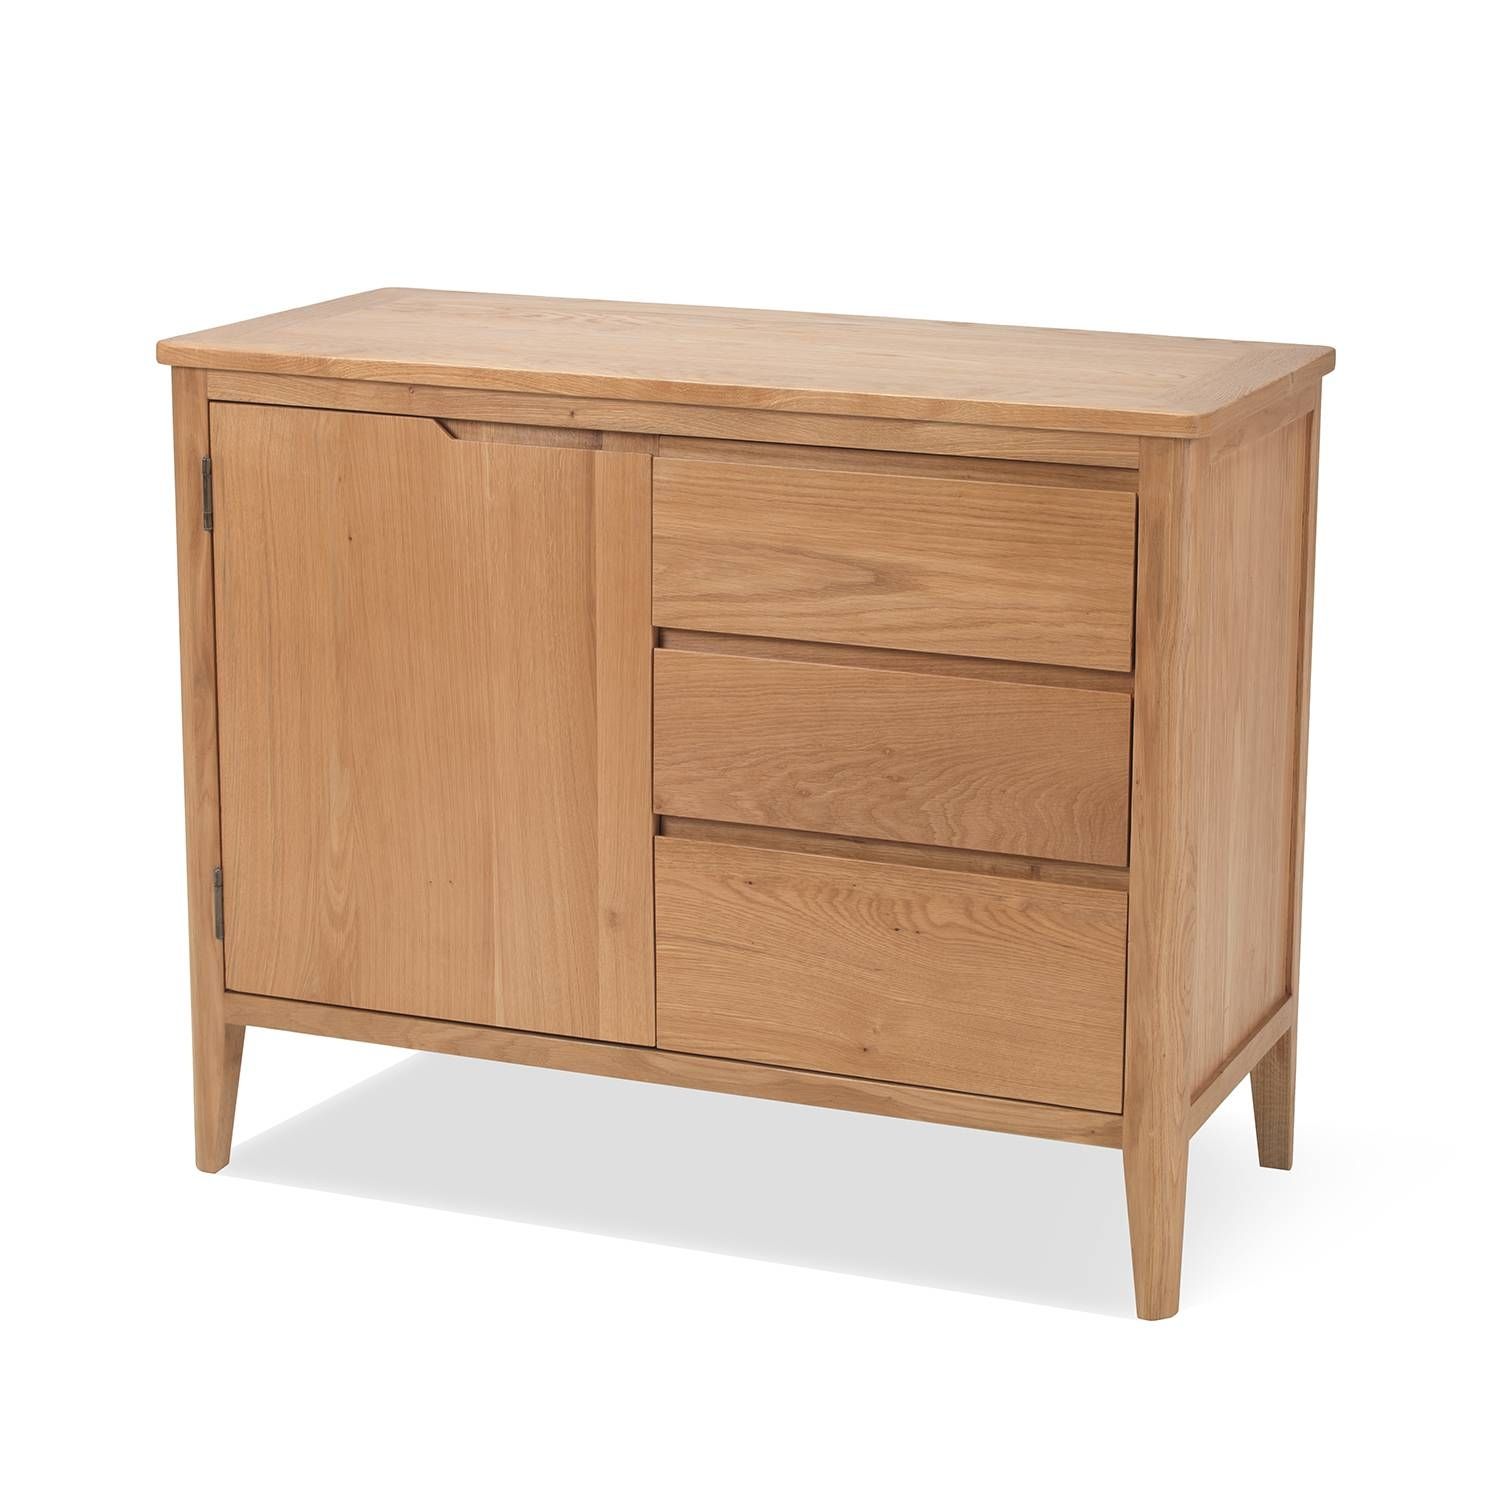 Cadley Oak Small Sideboard With Drawers – Lifestyle Furniture Uk In Small Sideboard (Photo 5 of 20)